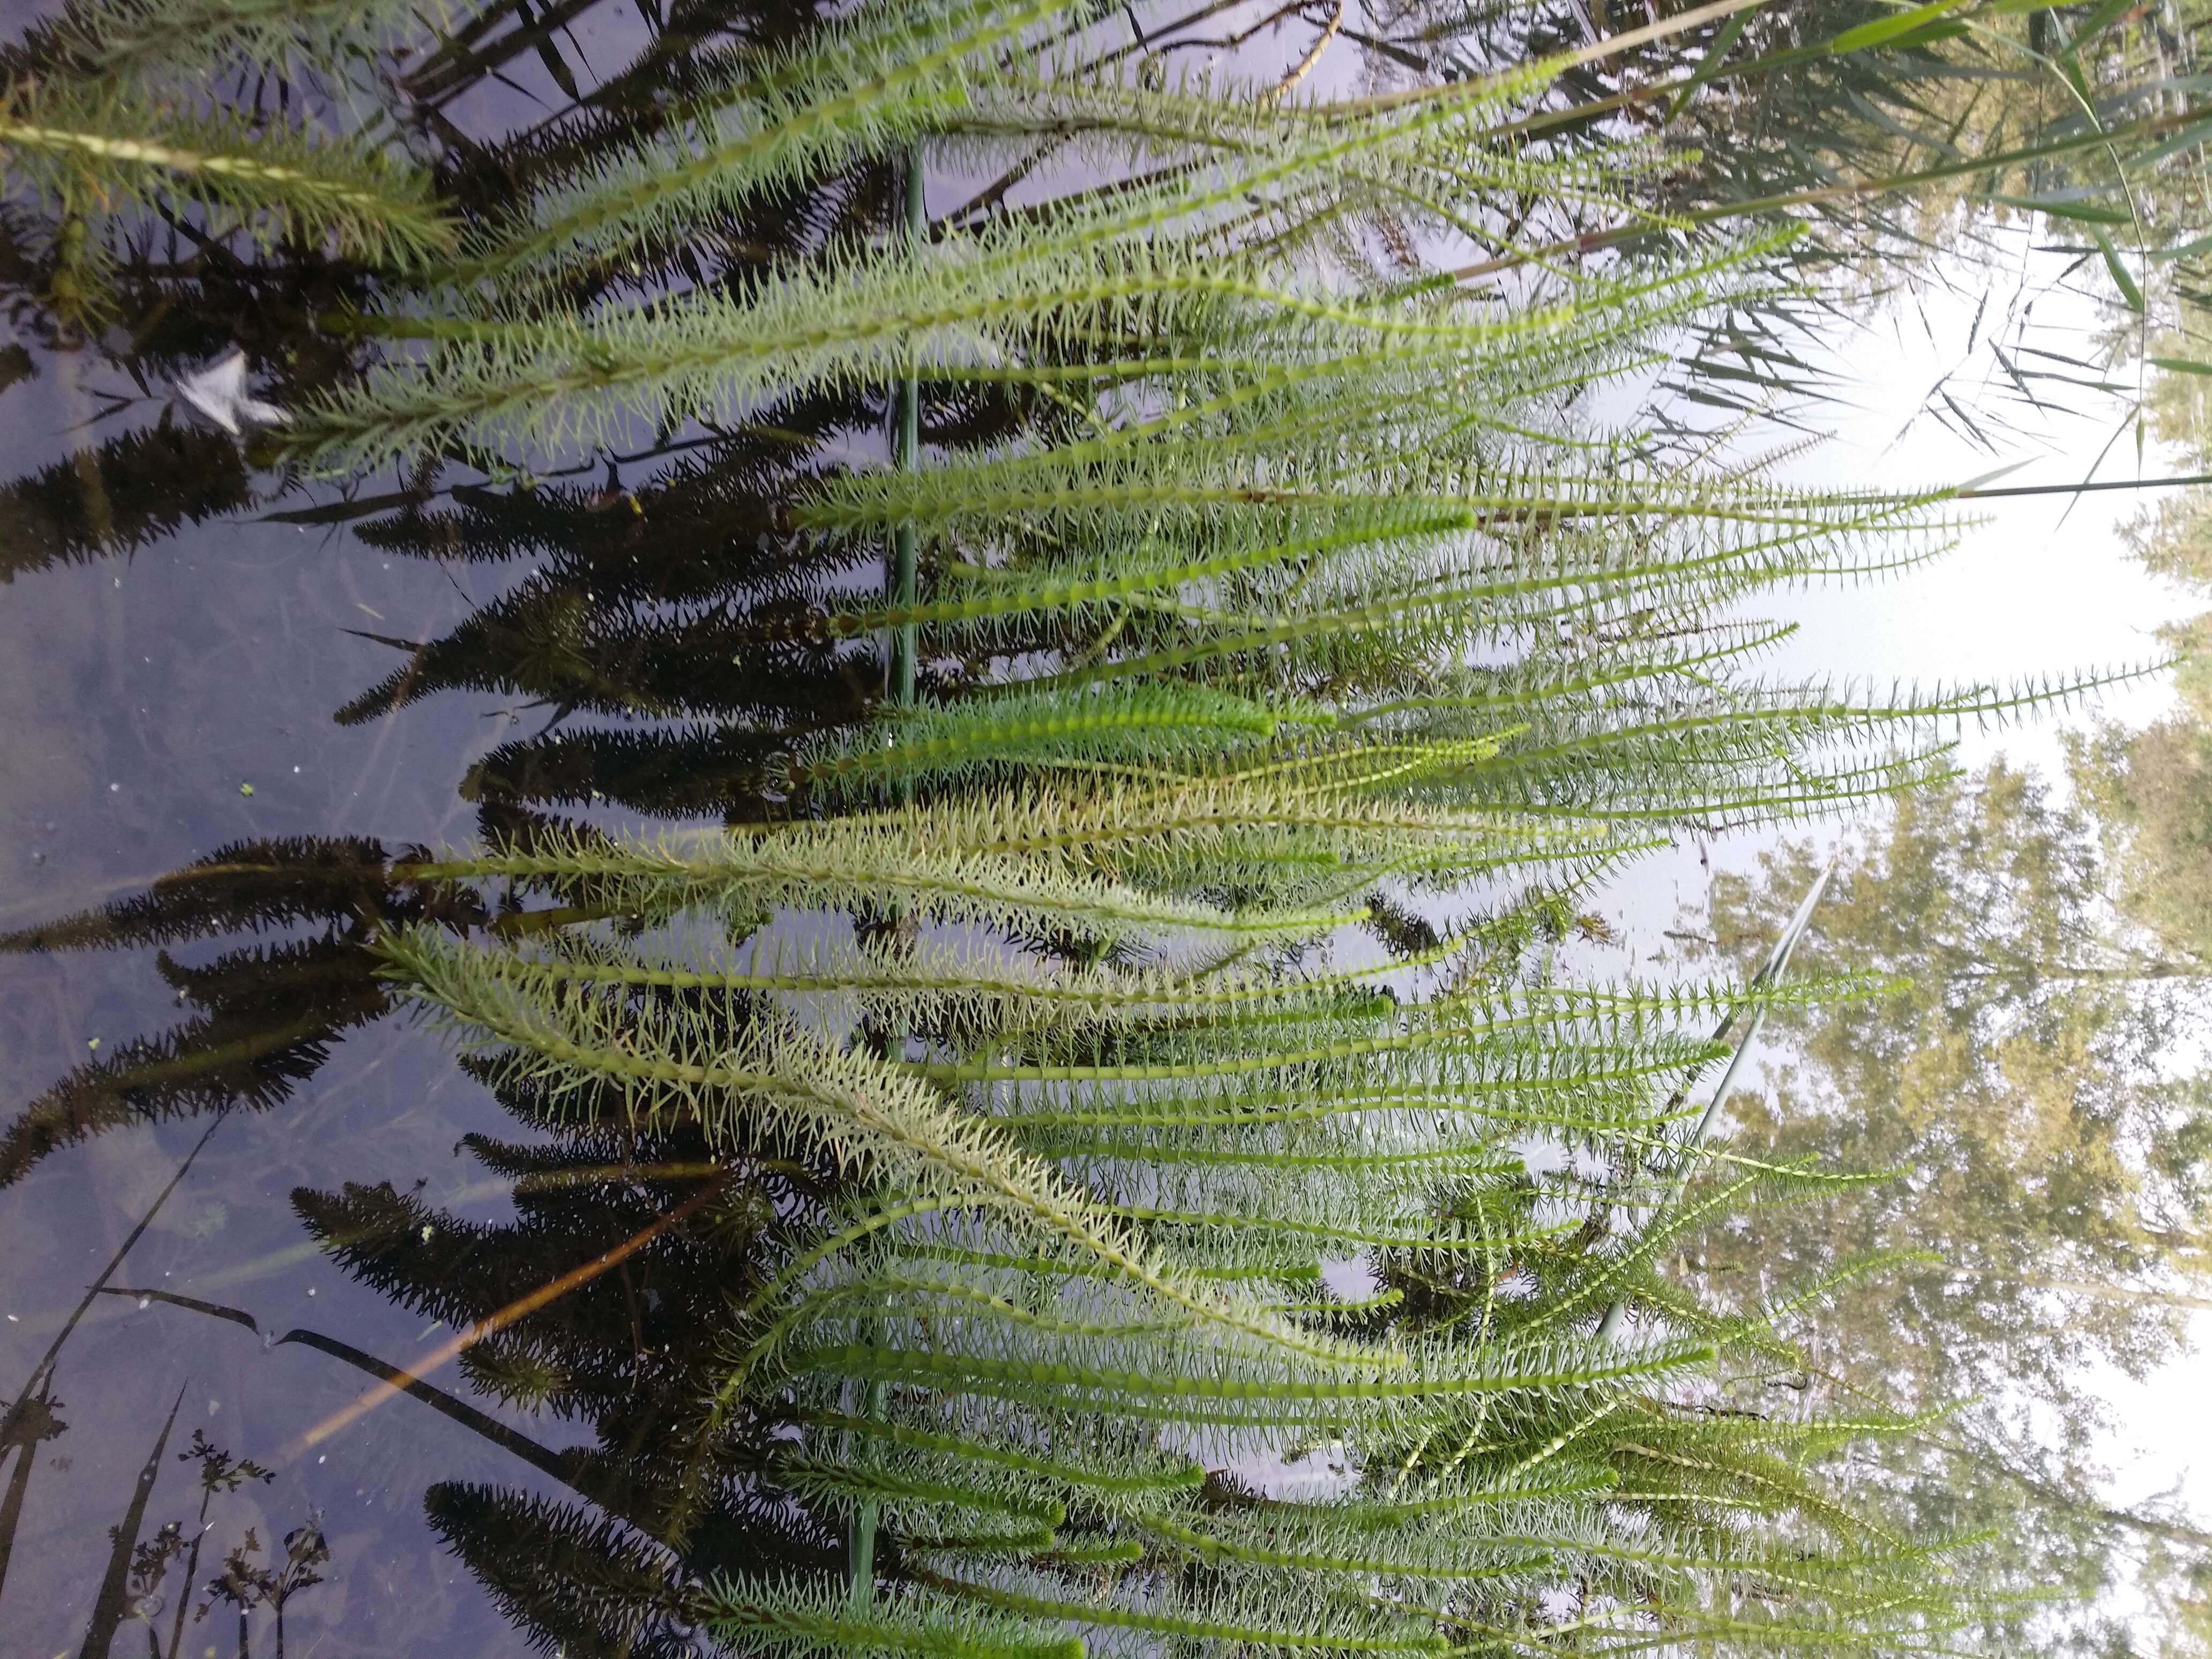 Image of Mare's Tail